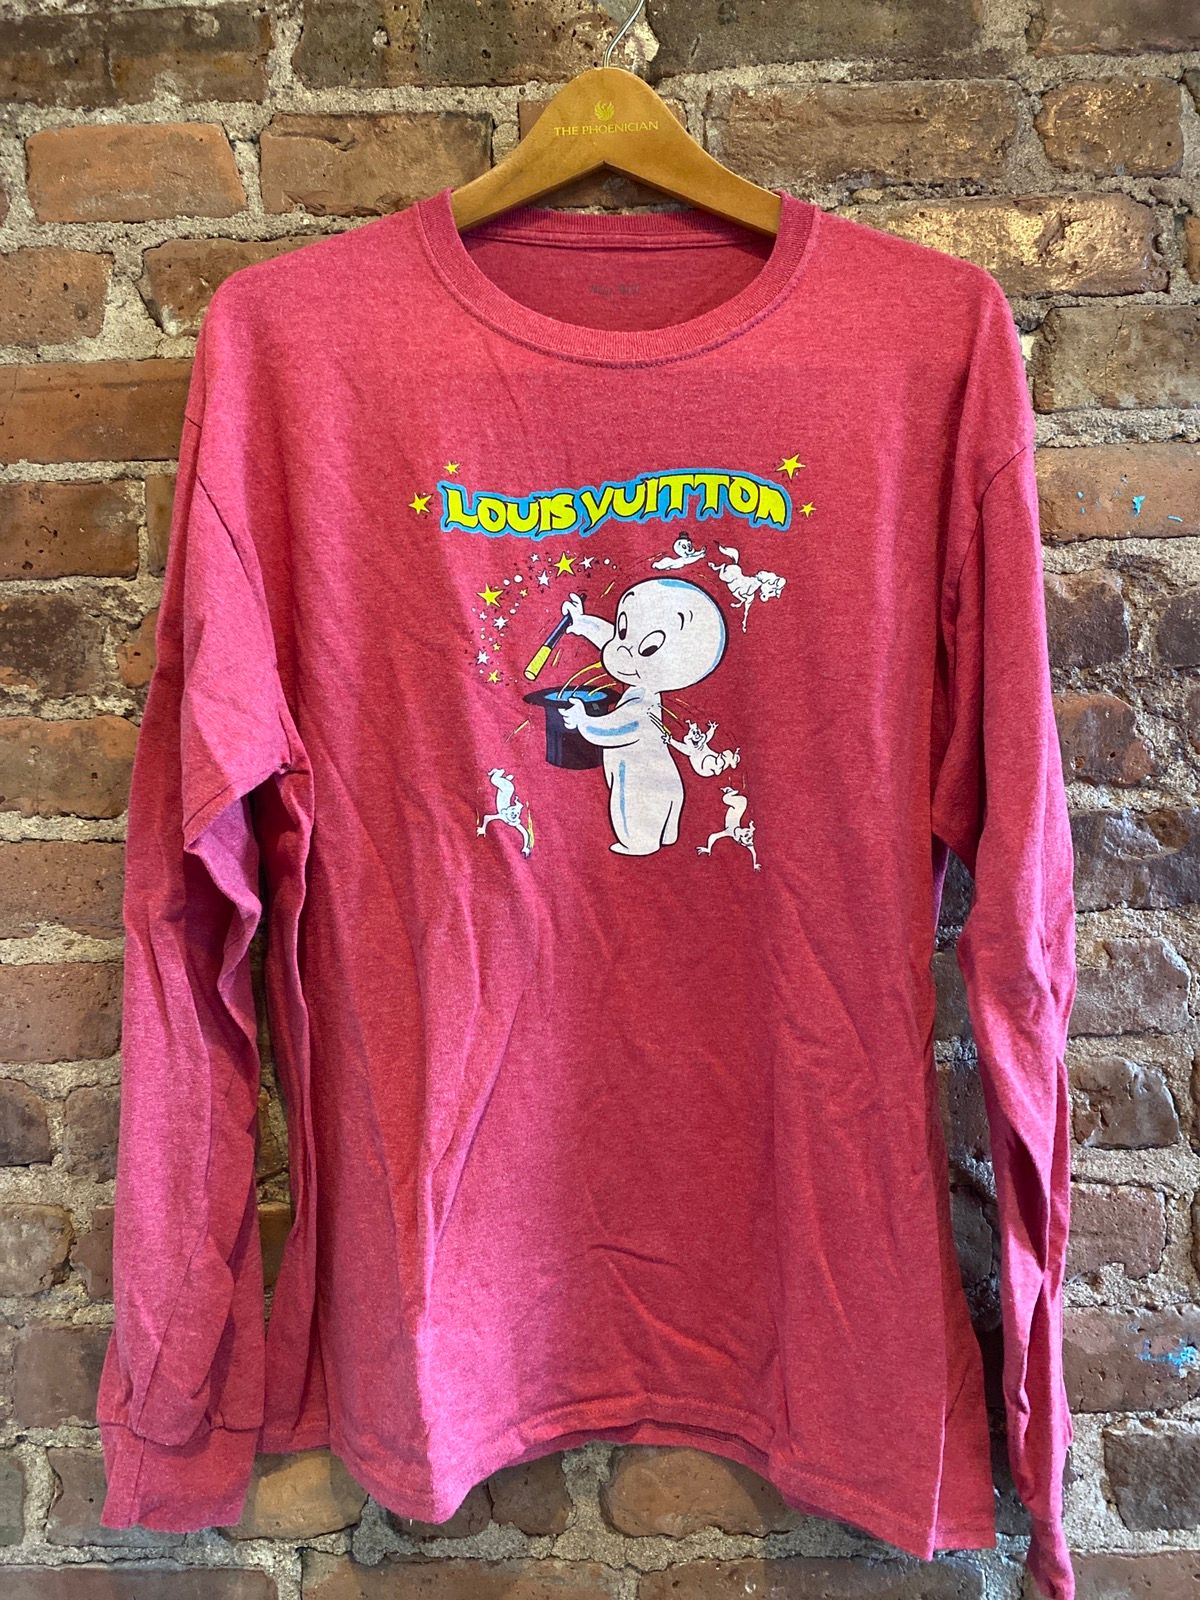 Mega Yacht Casper and Wendy Short Sleeve Tee Purple Size Small in